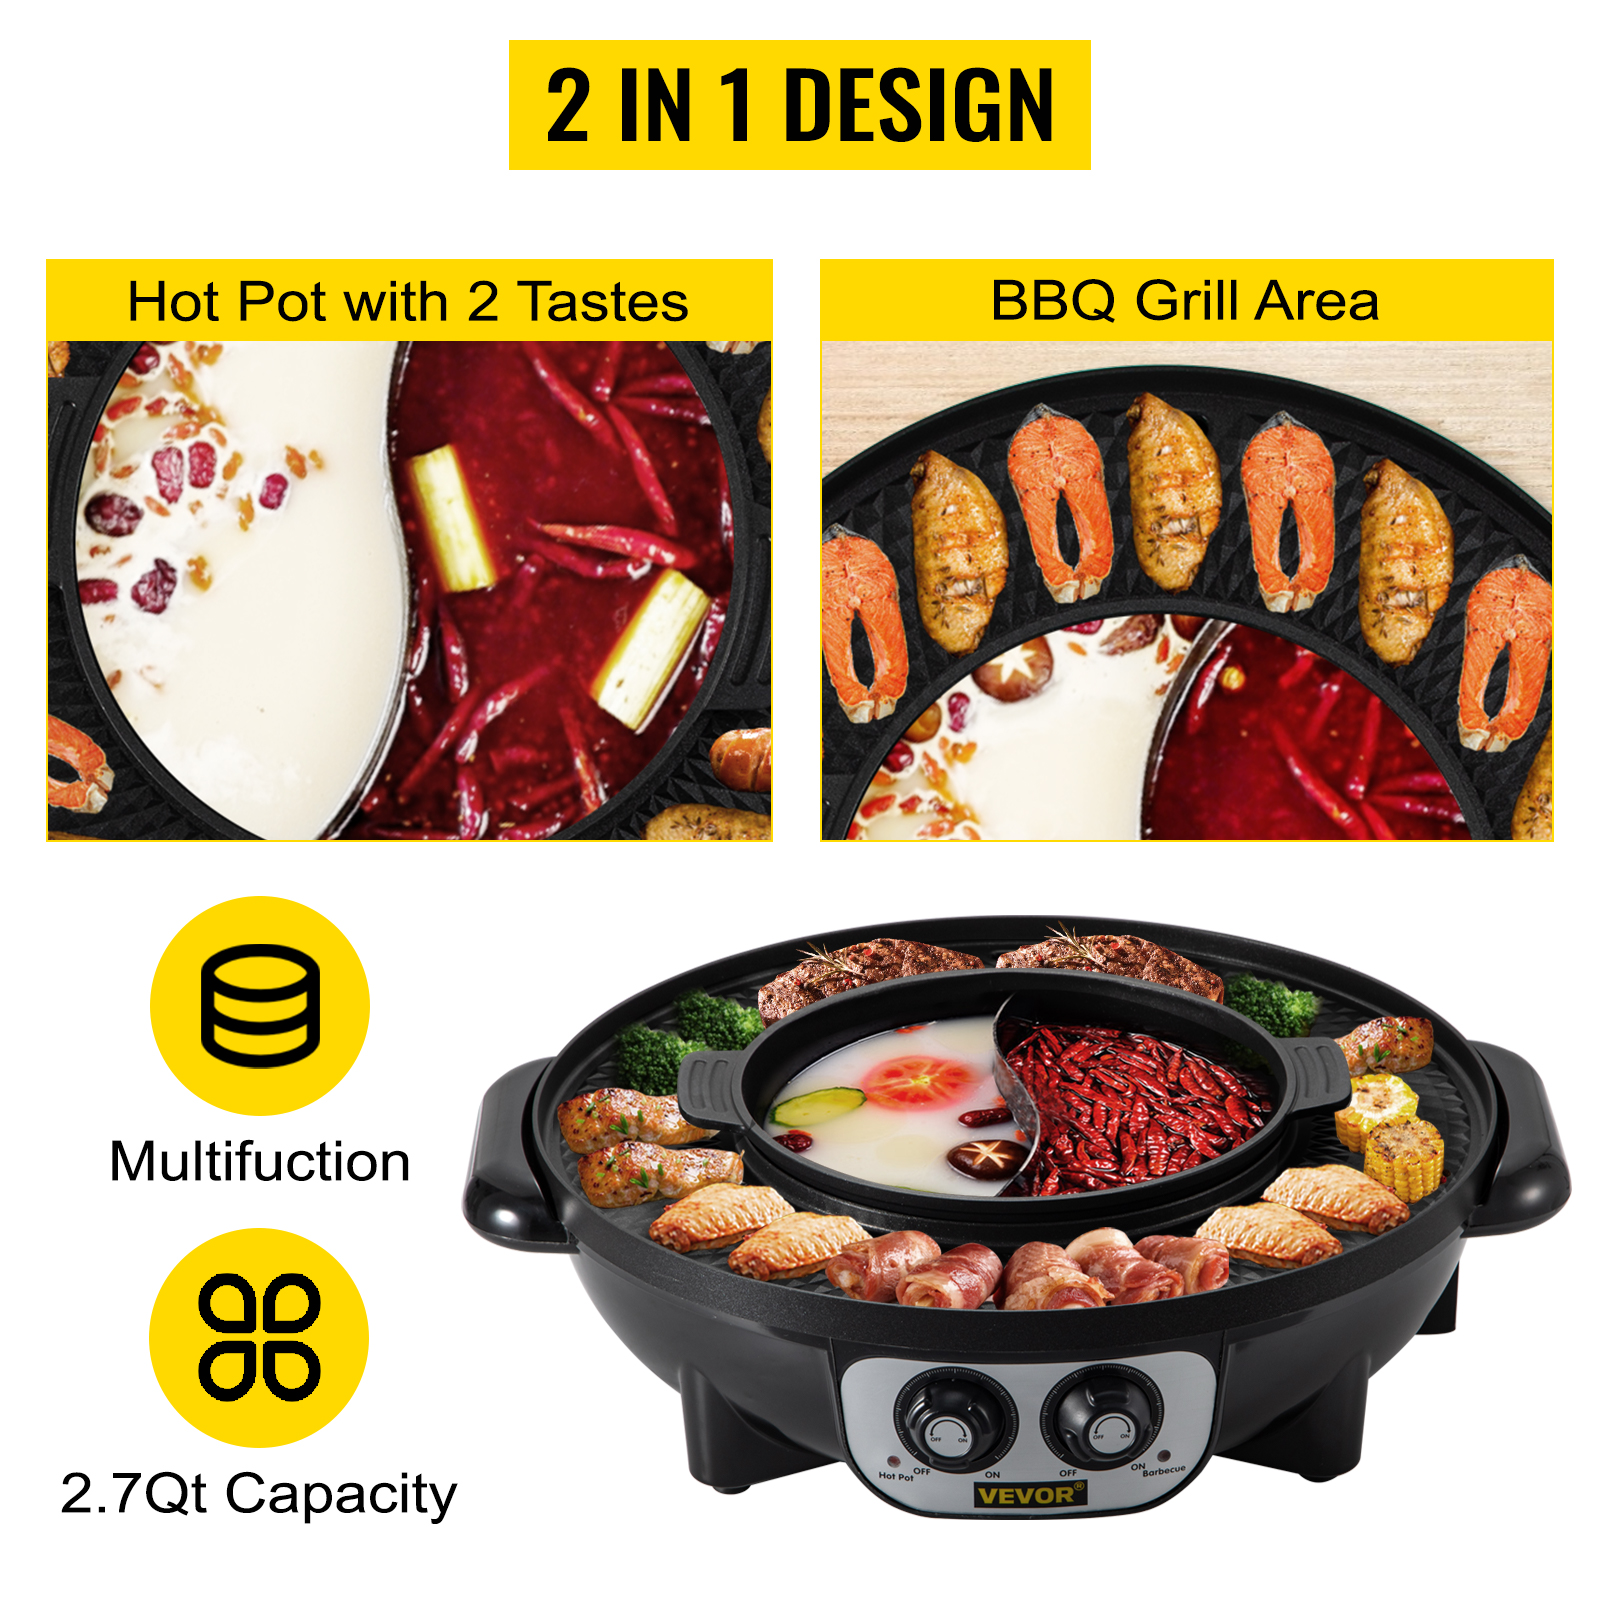 NATUREACT 2 in 1 Electric Grill with Hot Pot and Non-Stick Coating,Electric ShabuShabu Hot Pot with Grill and BBQ Machine,Smokeless Grill Pan for 2-6 People Family Party 